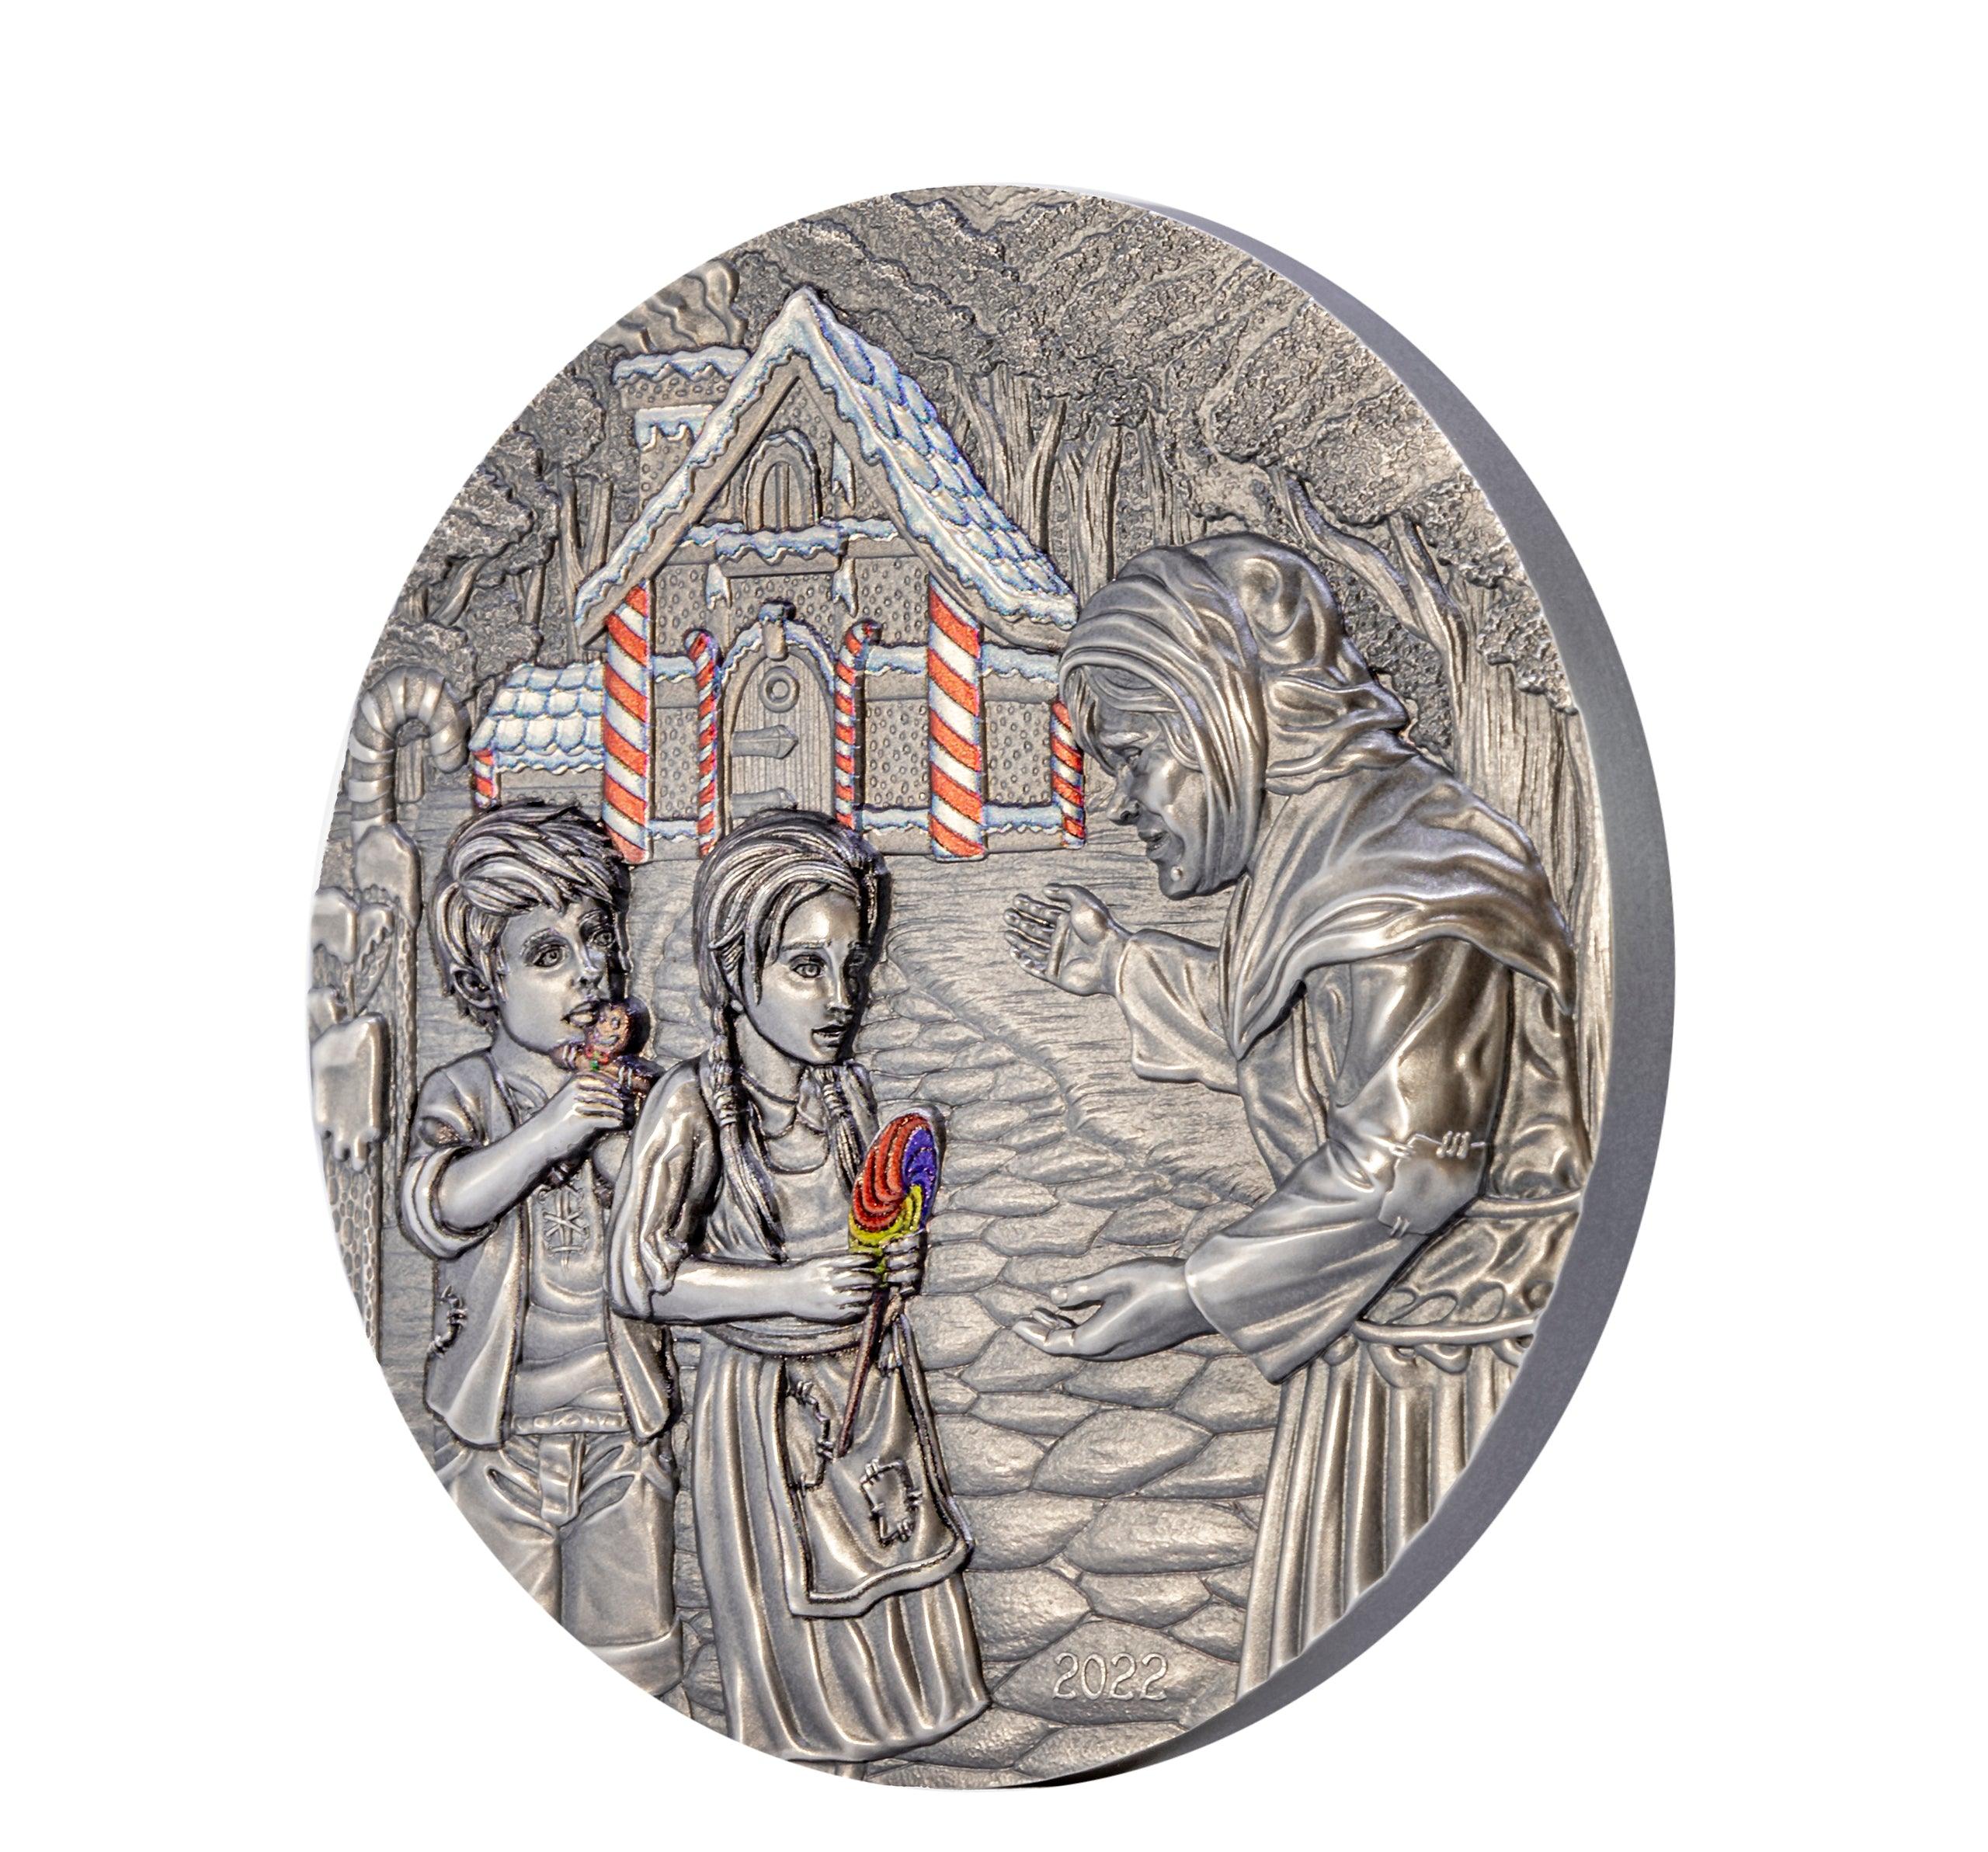 HANSEL AND GRETEL Fairy Tales Fables 3 Oz Silver Coin $20 Cook